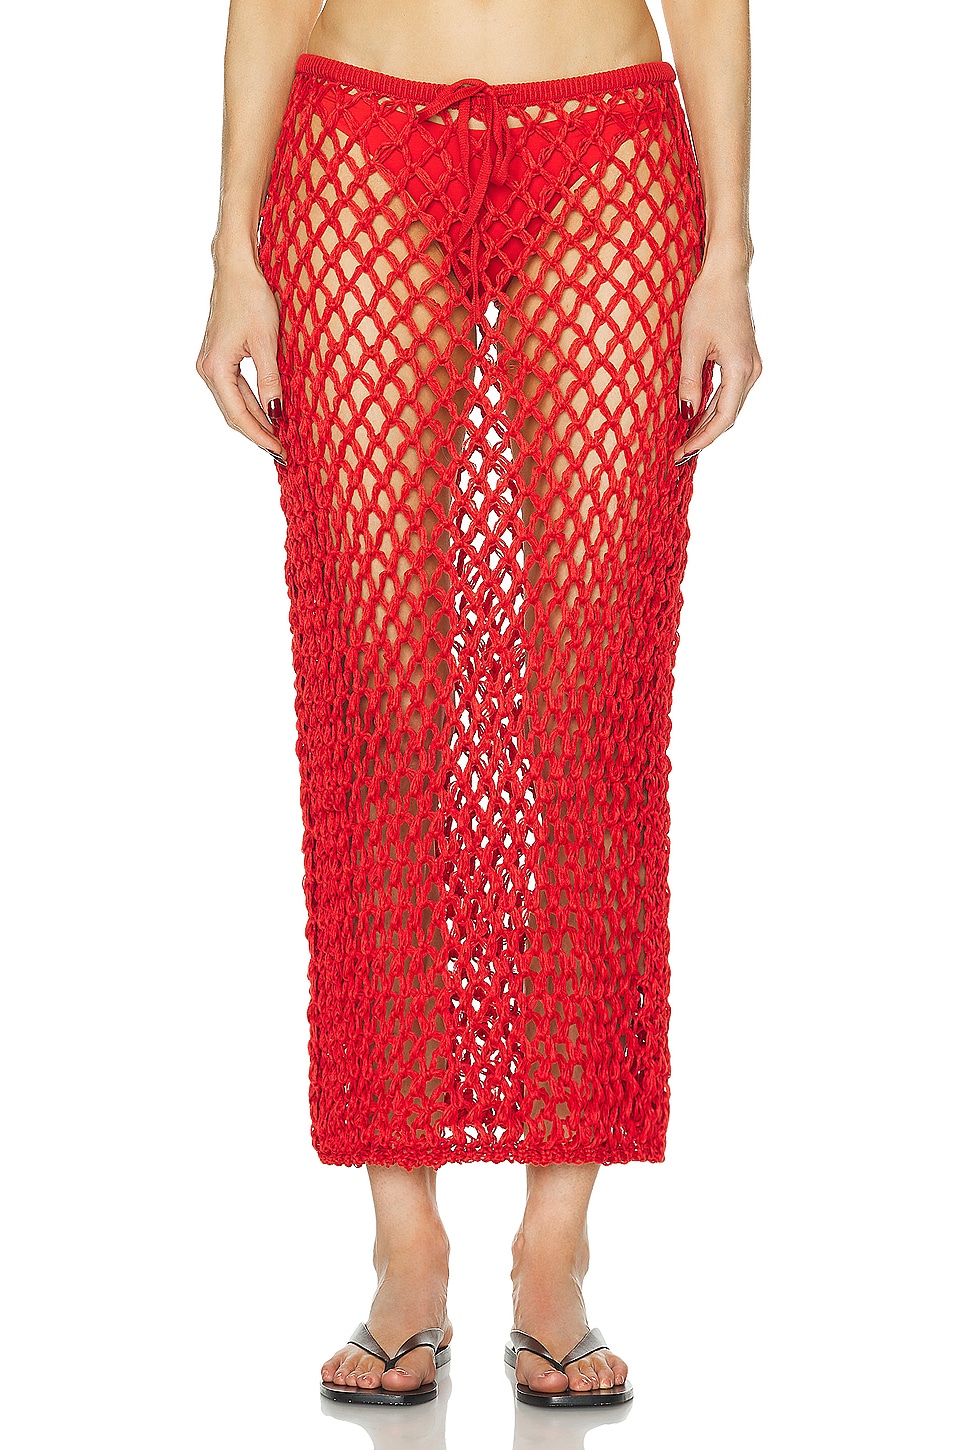 Image 1 of HAIGHT. Knit Moana Skirt in Red